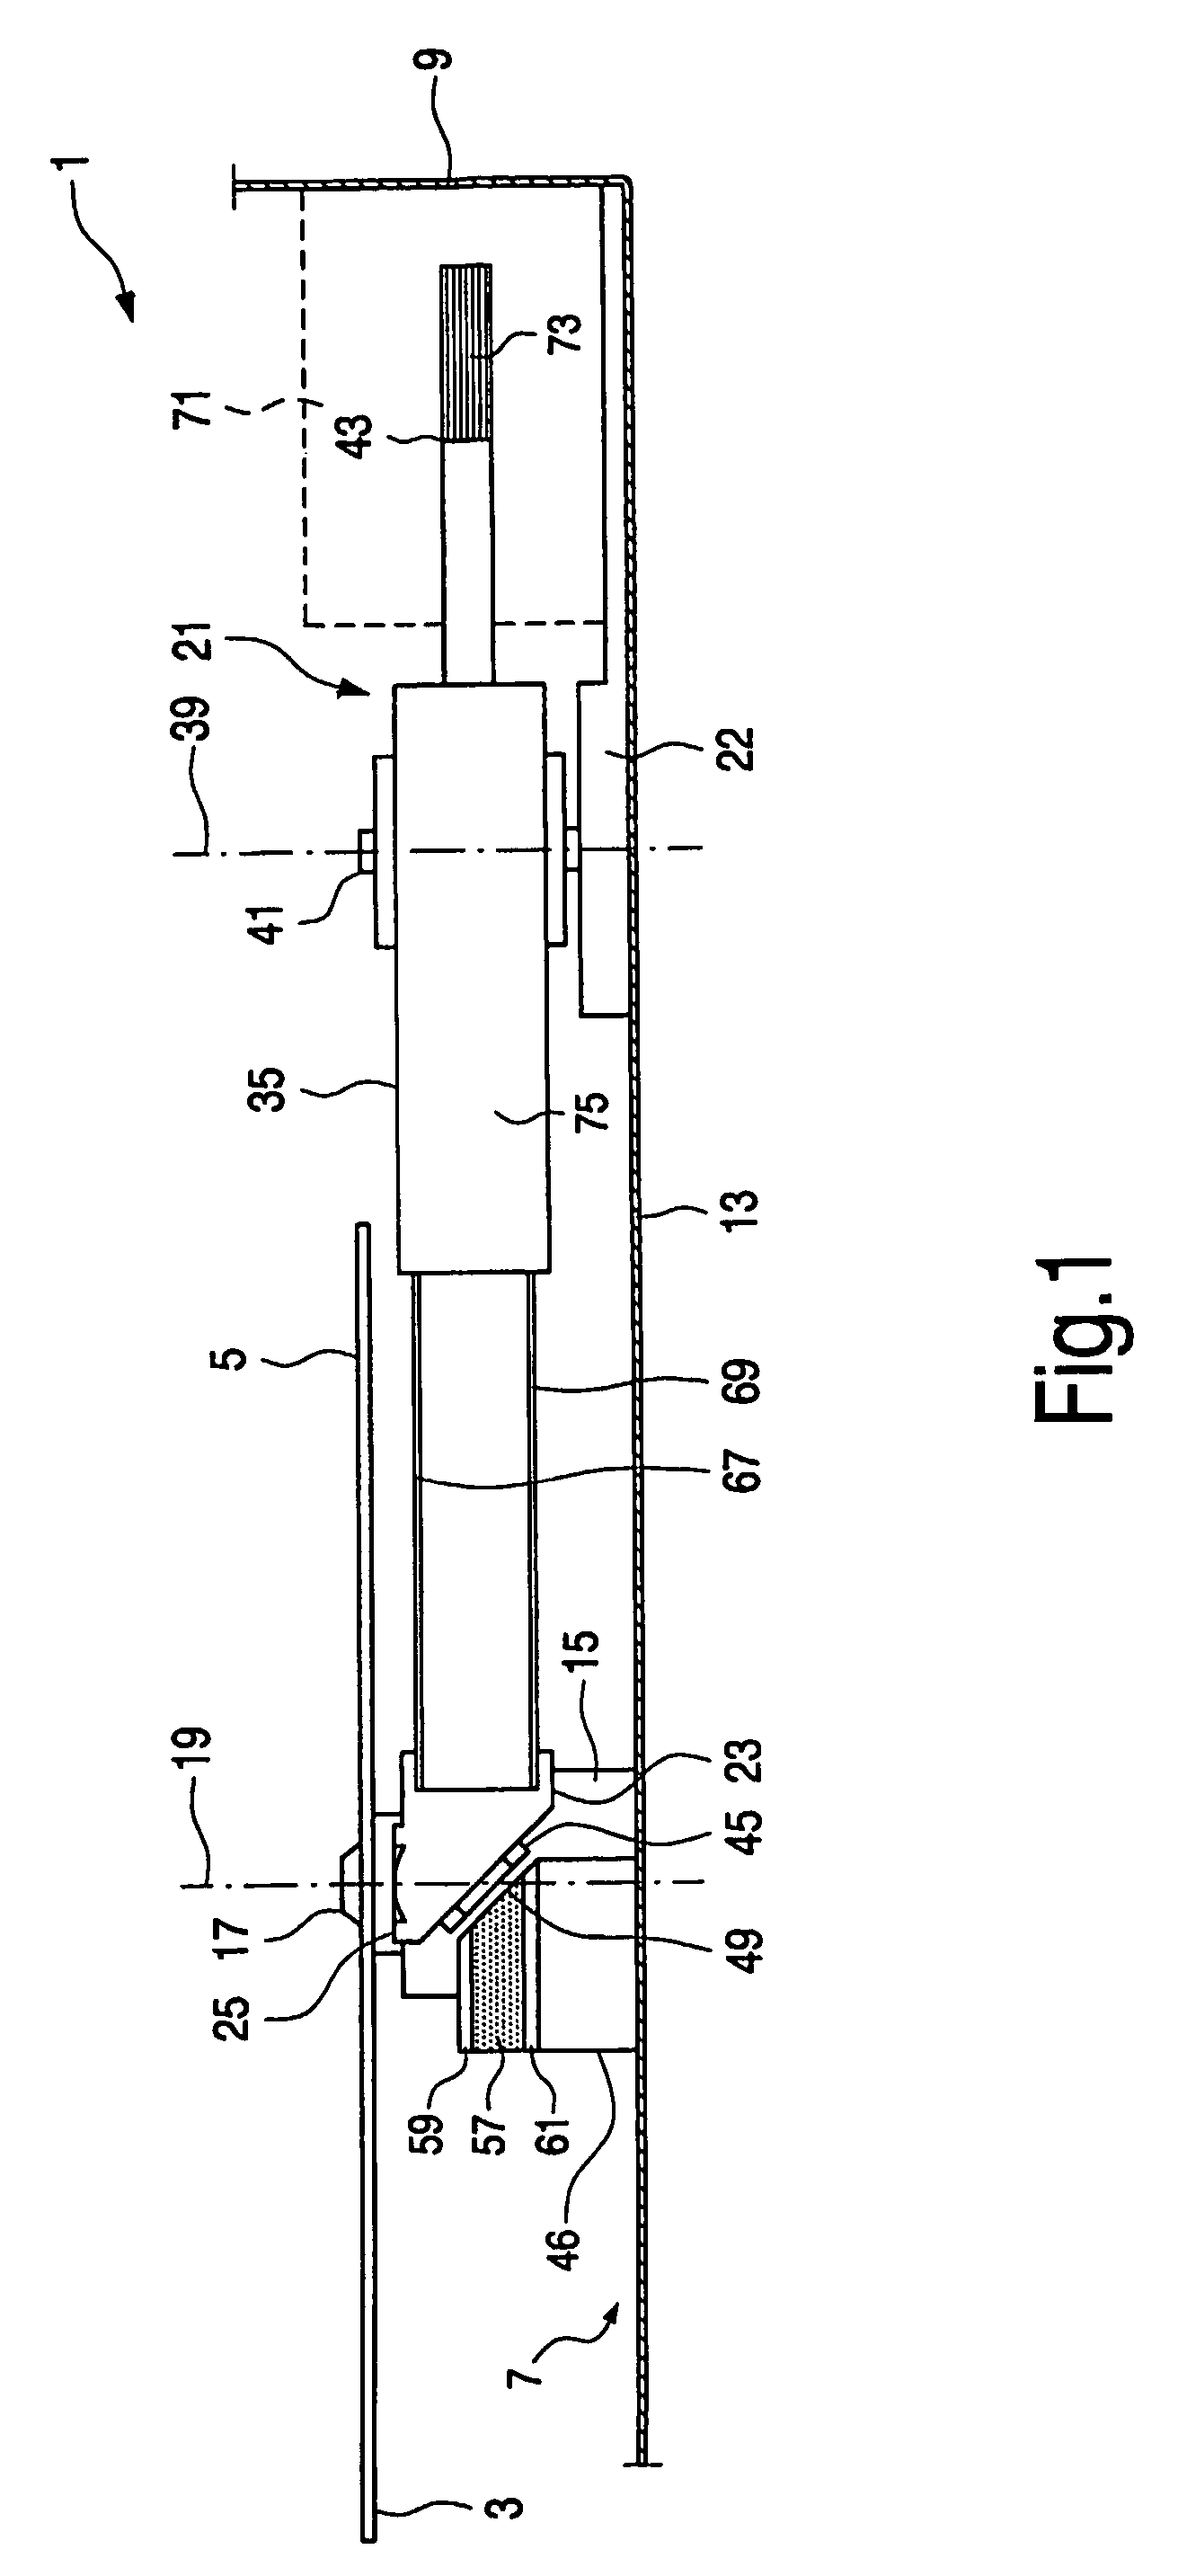 Optical disc apparatus for recording and/or reproducing information on/from an information surface of a rotatable optical disc